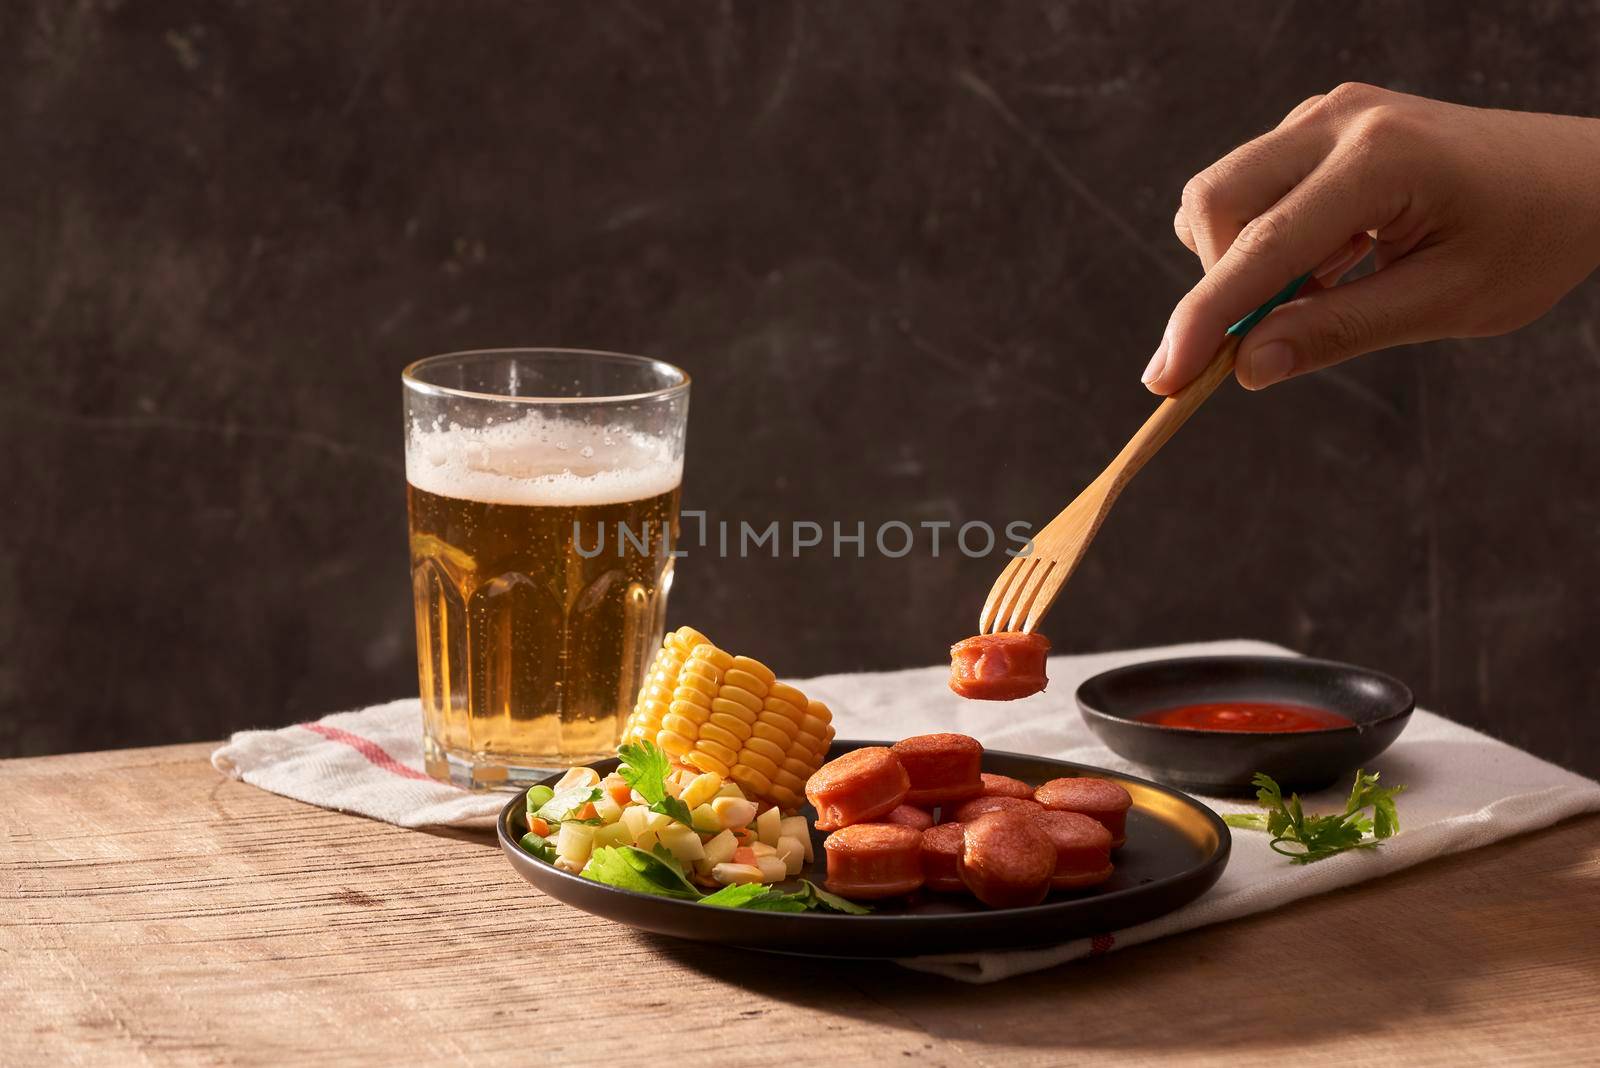 Man eating sliced sausages with salad and having wheat beer